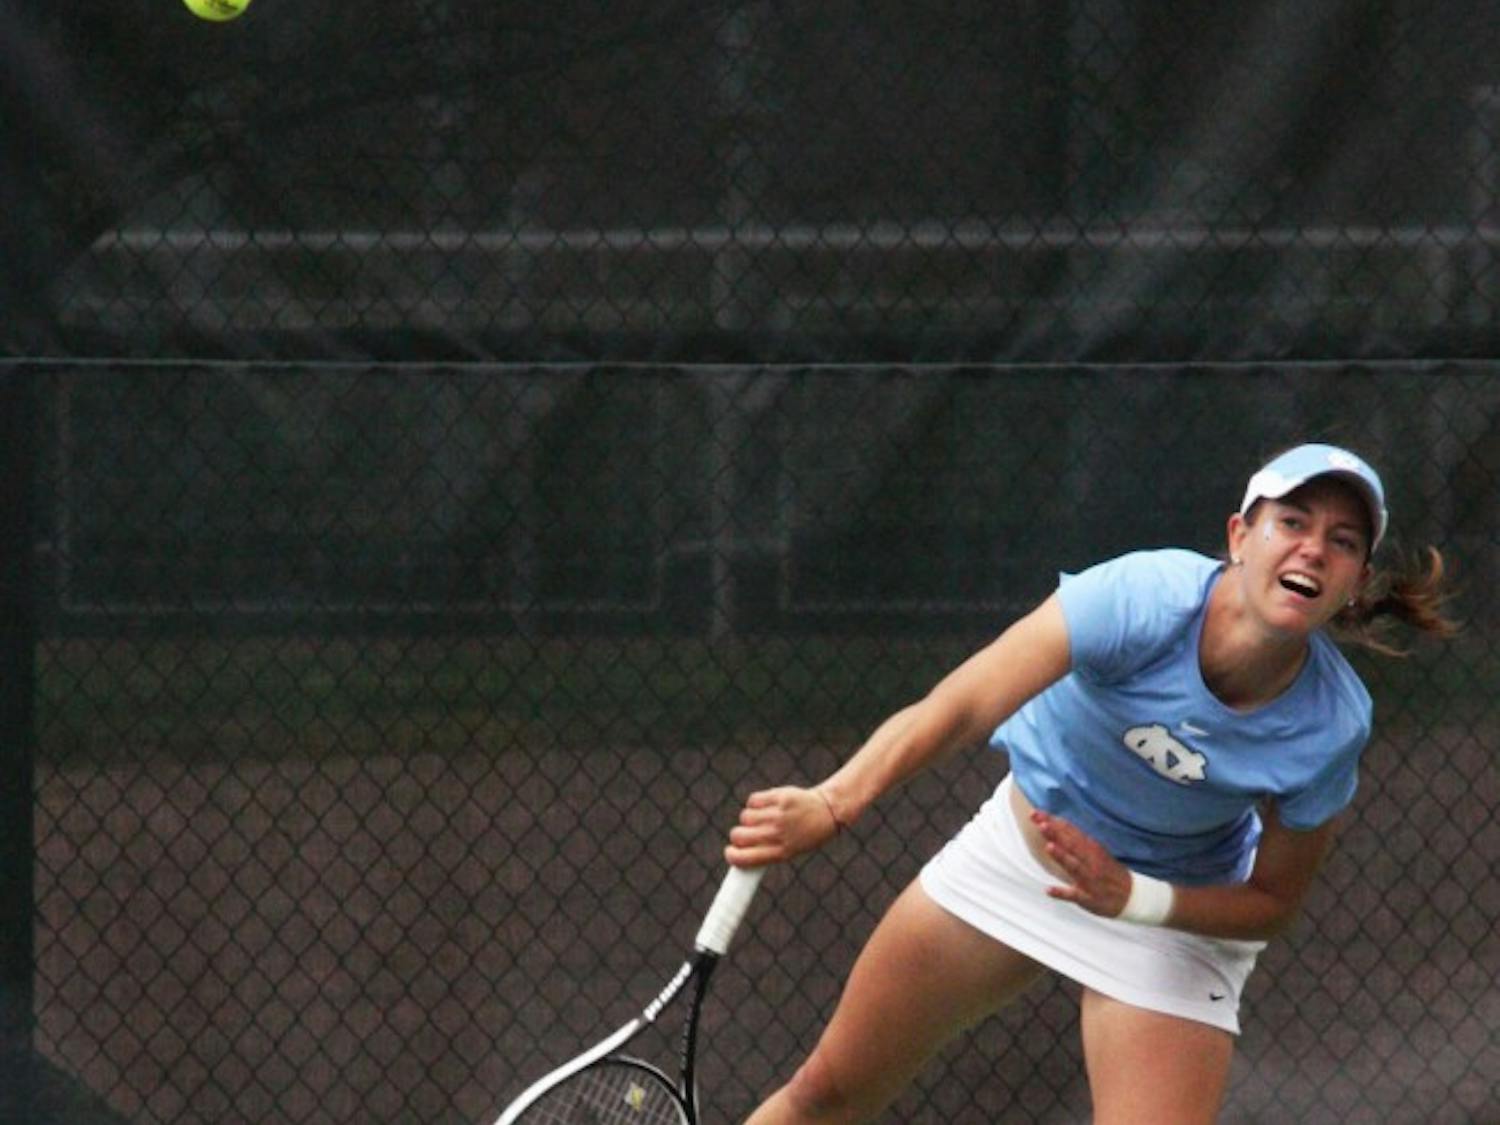 	UNC’s Zoe De Bruycker fought tooth-and-nail Sunday against Clemson’s Jospia Bek in a thrilling three-set tiebreaker. De Bruycker’s win on Court No. 1 against the nation’s No. 10 player gave UNC its ninth ACC win.